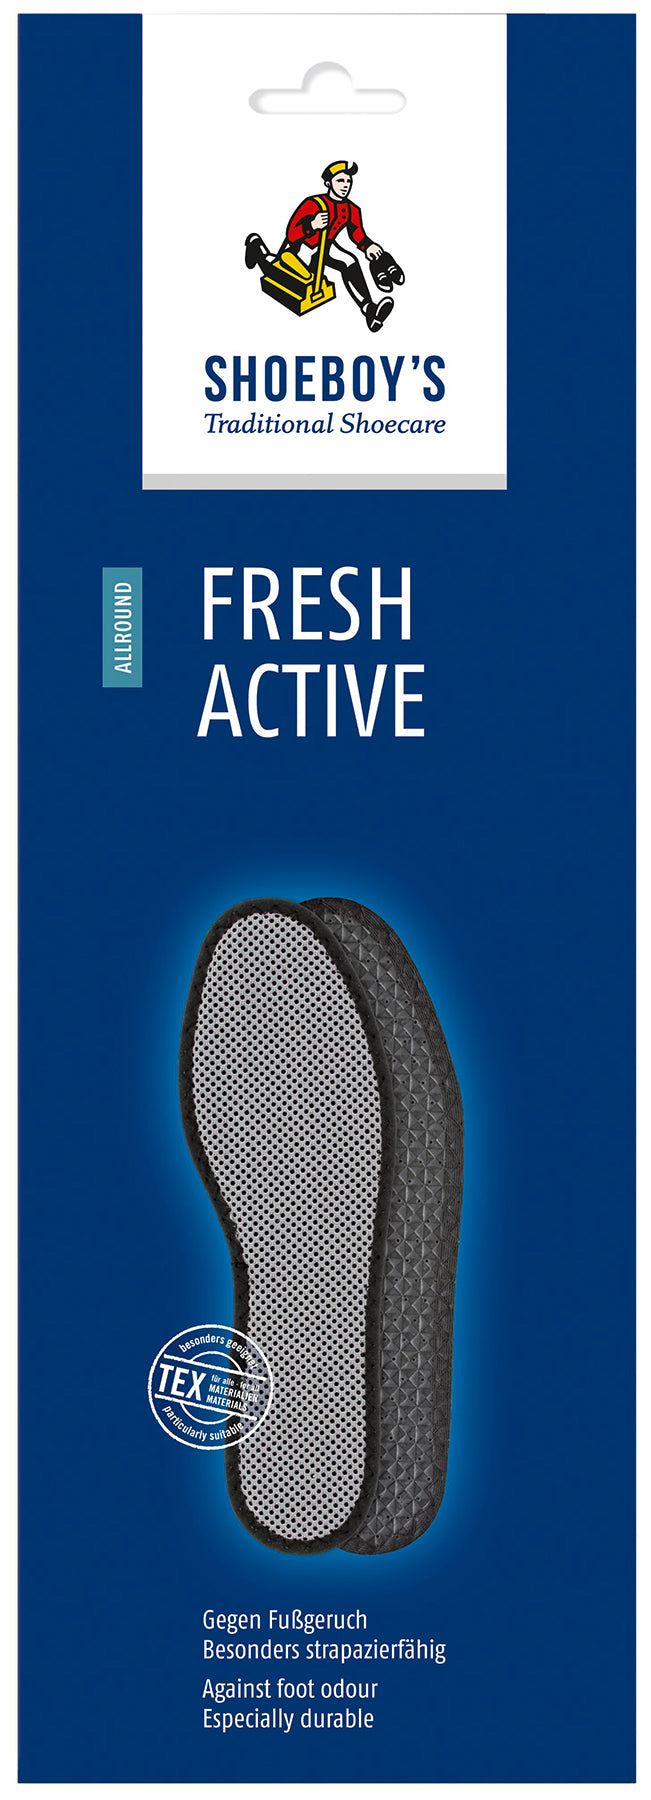 Shoeboy's Fresh Active Insoles - Activated Carbon Filter, Absorbs Foot Odor, Breathable Padded Polyester Fabric, Antislip - Men's & Women's Sizes - Trustables